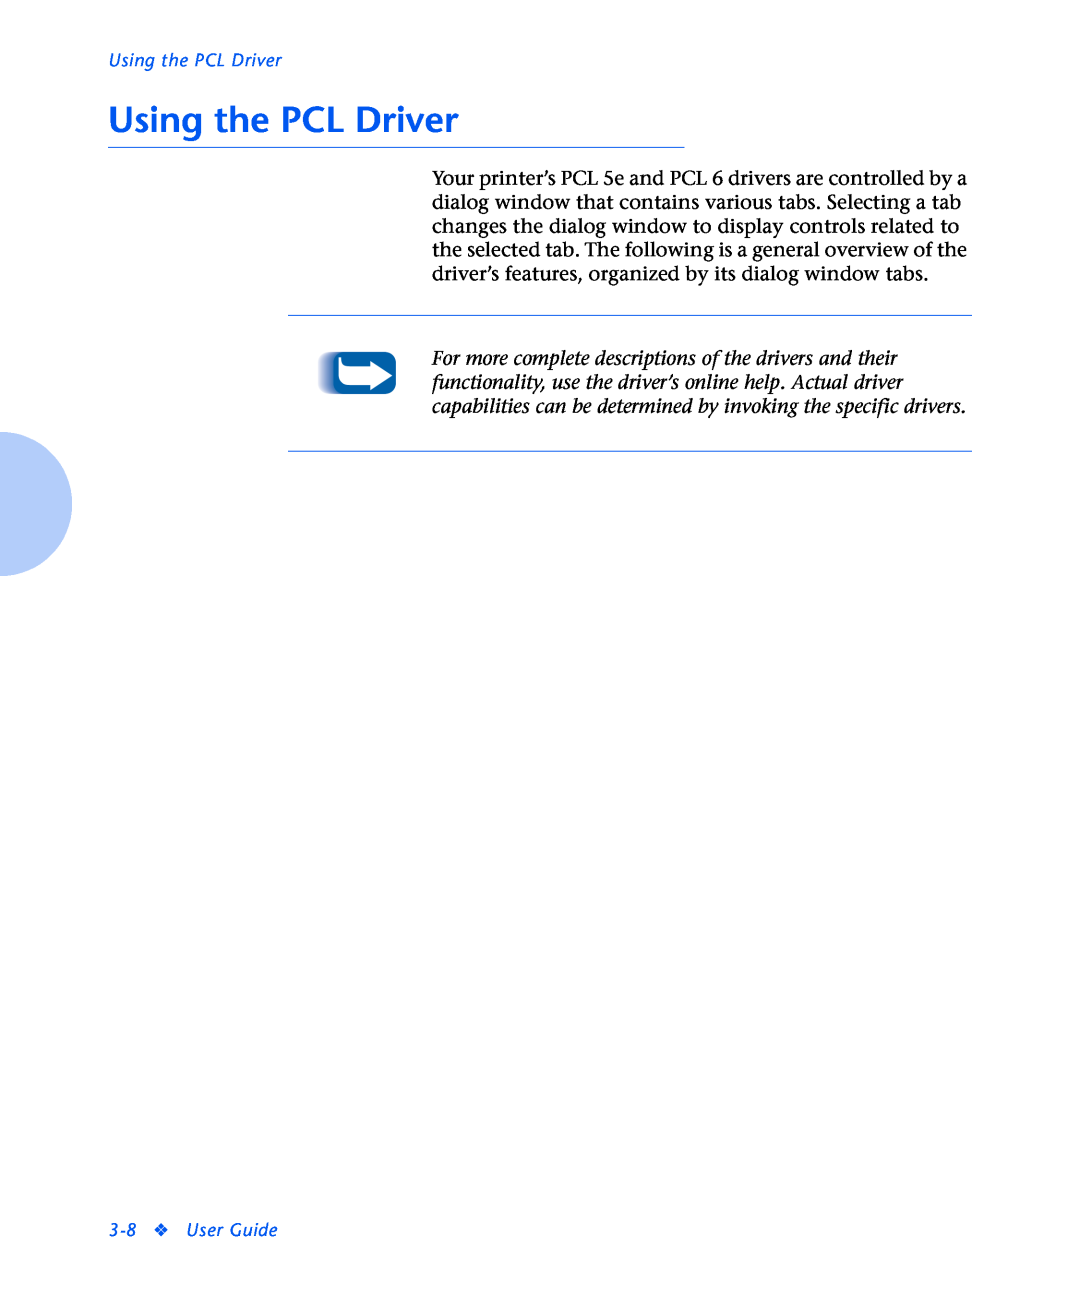 Xerox N2125 manual Using the PCL Driver, User Guide 